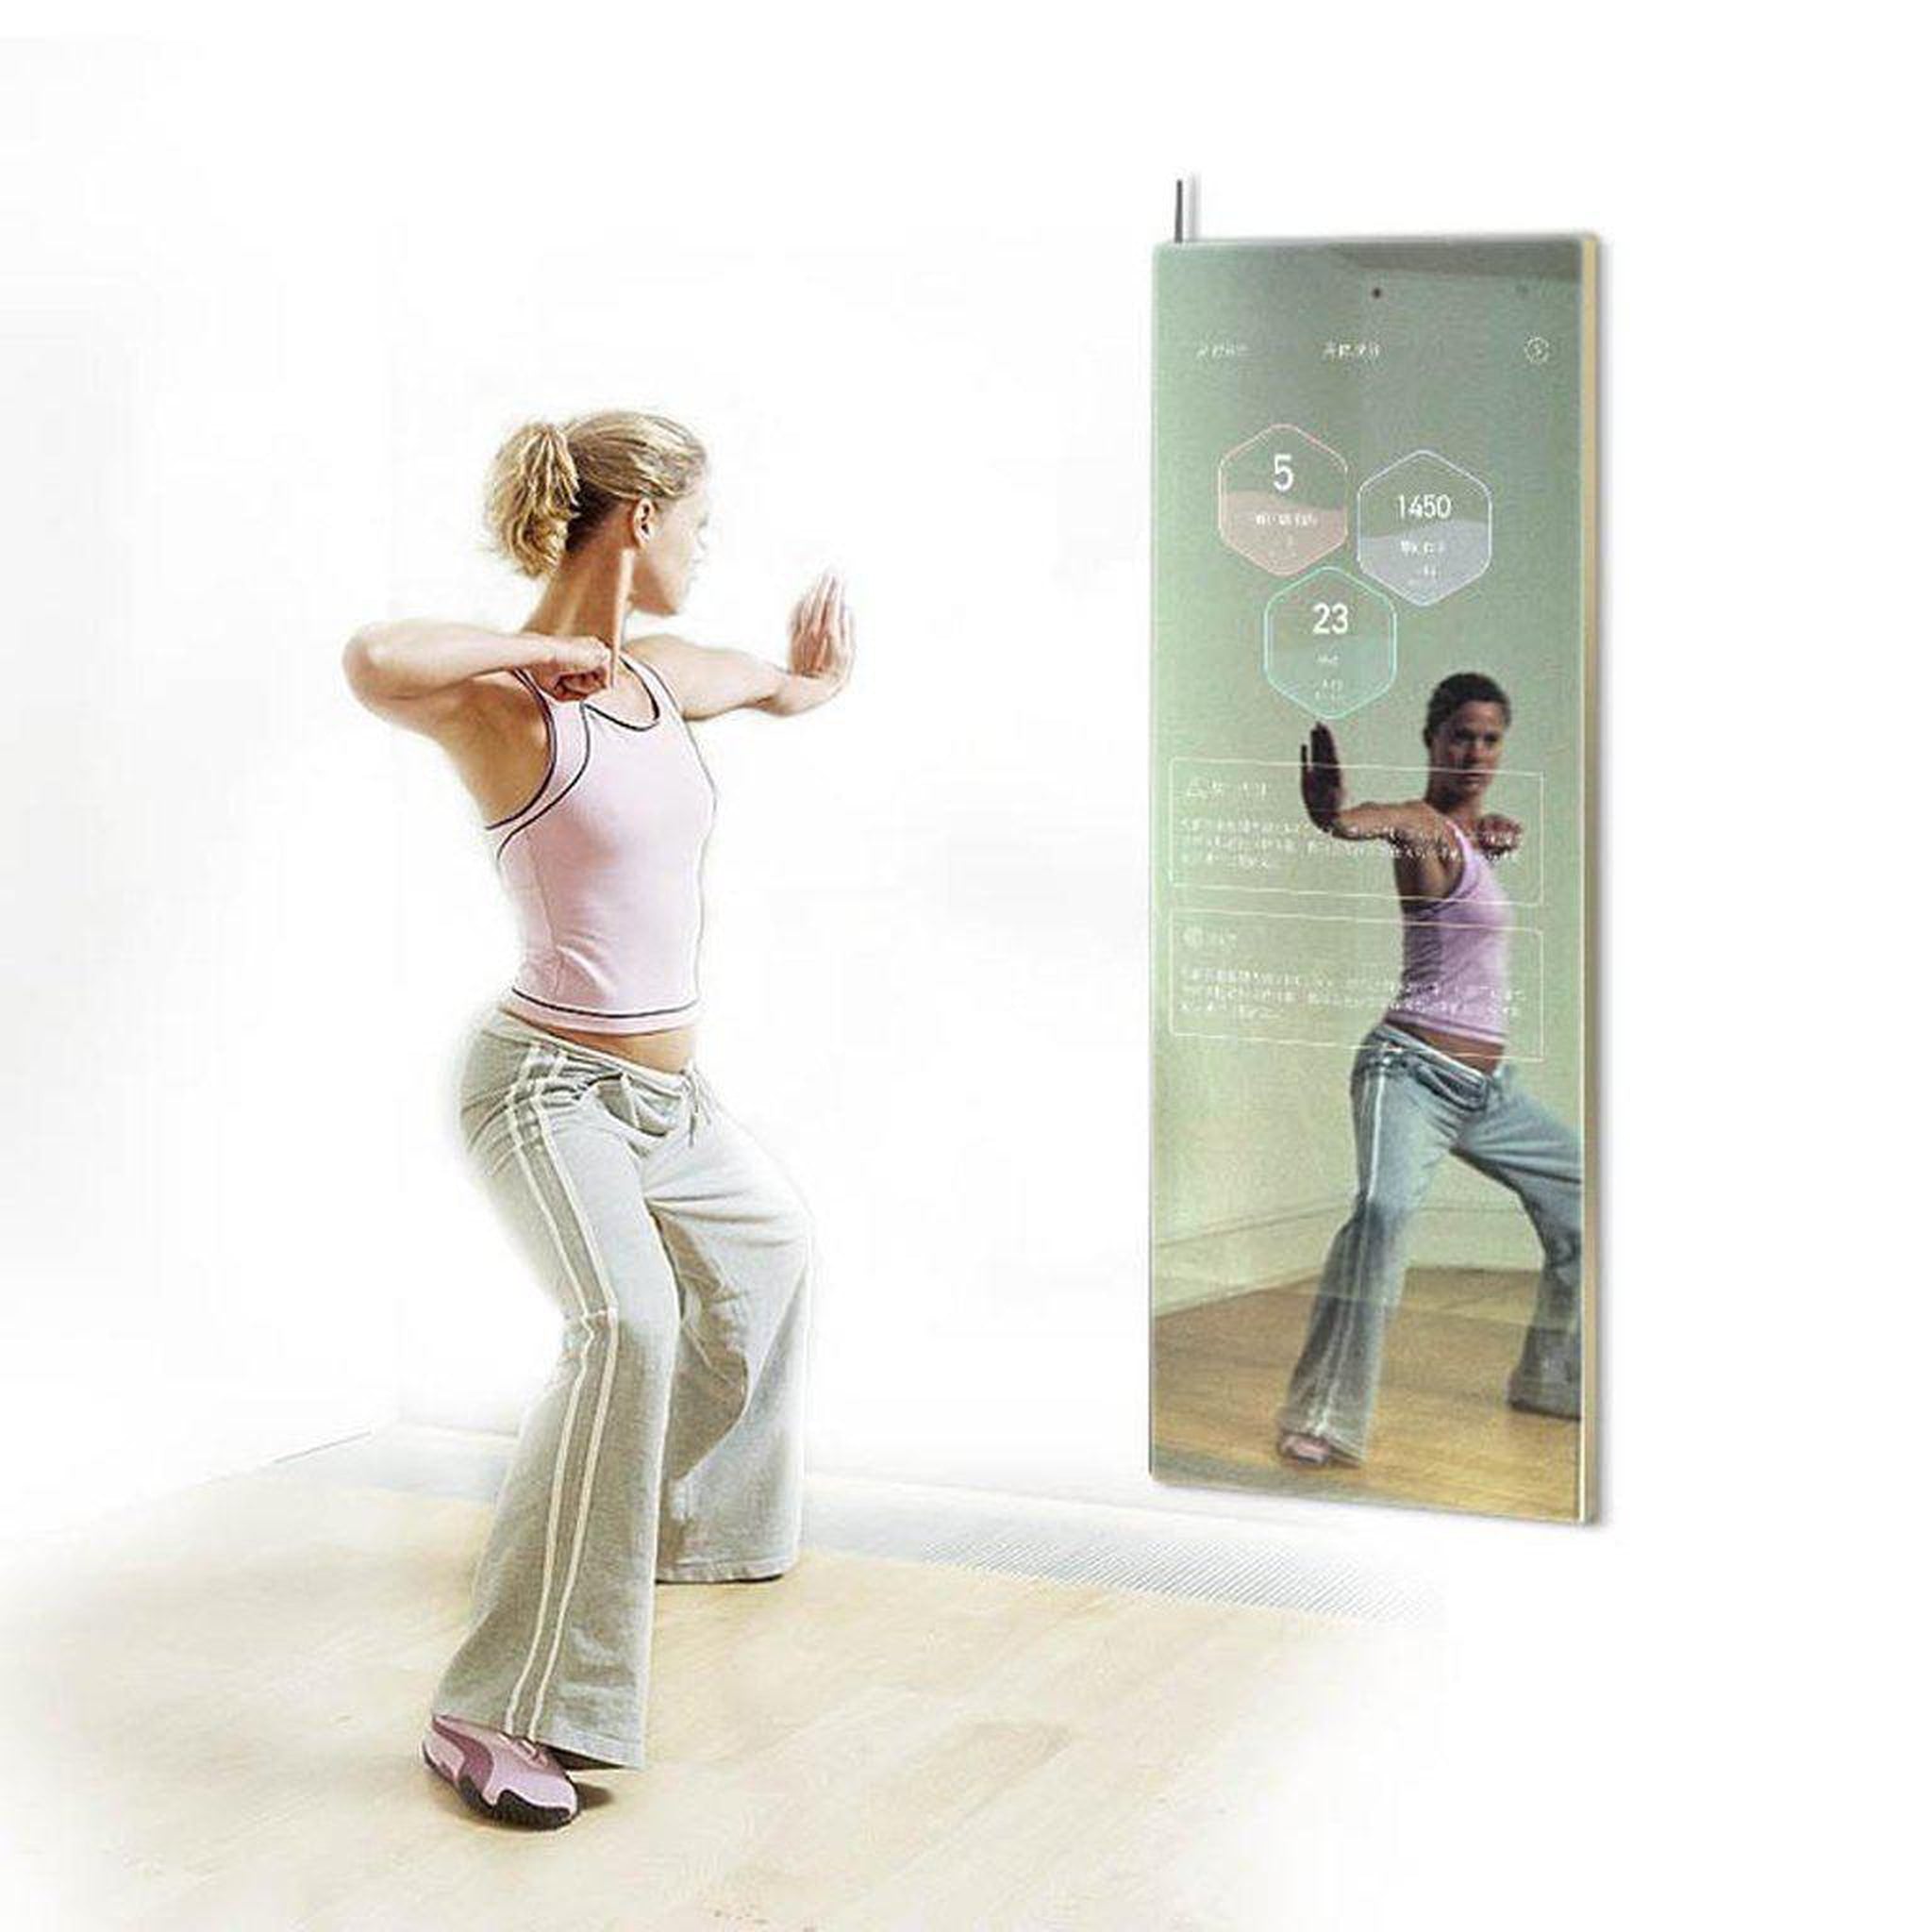 Aquadom NRG-1848-HD-BFS Fitness 18 x 48 inch Energy Smart Mirror with 5MP HD Camera and Body Fat Scale